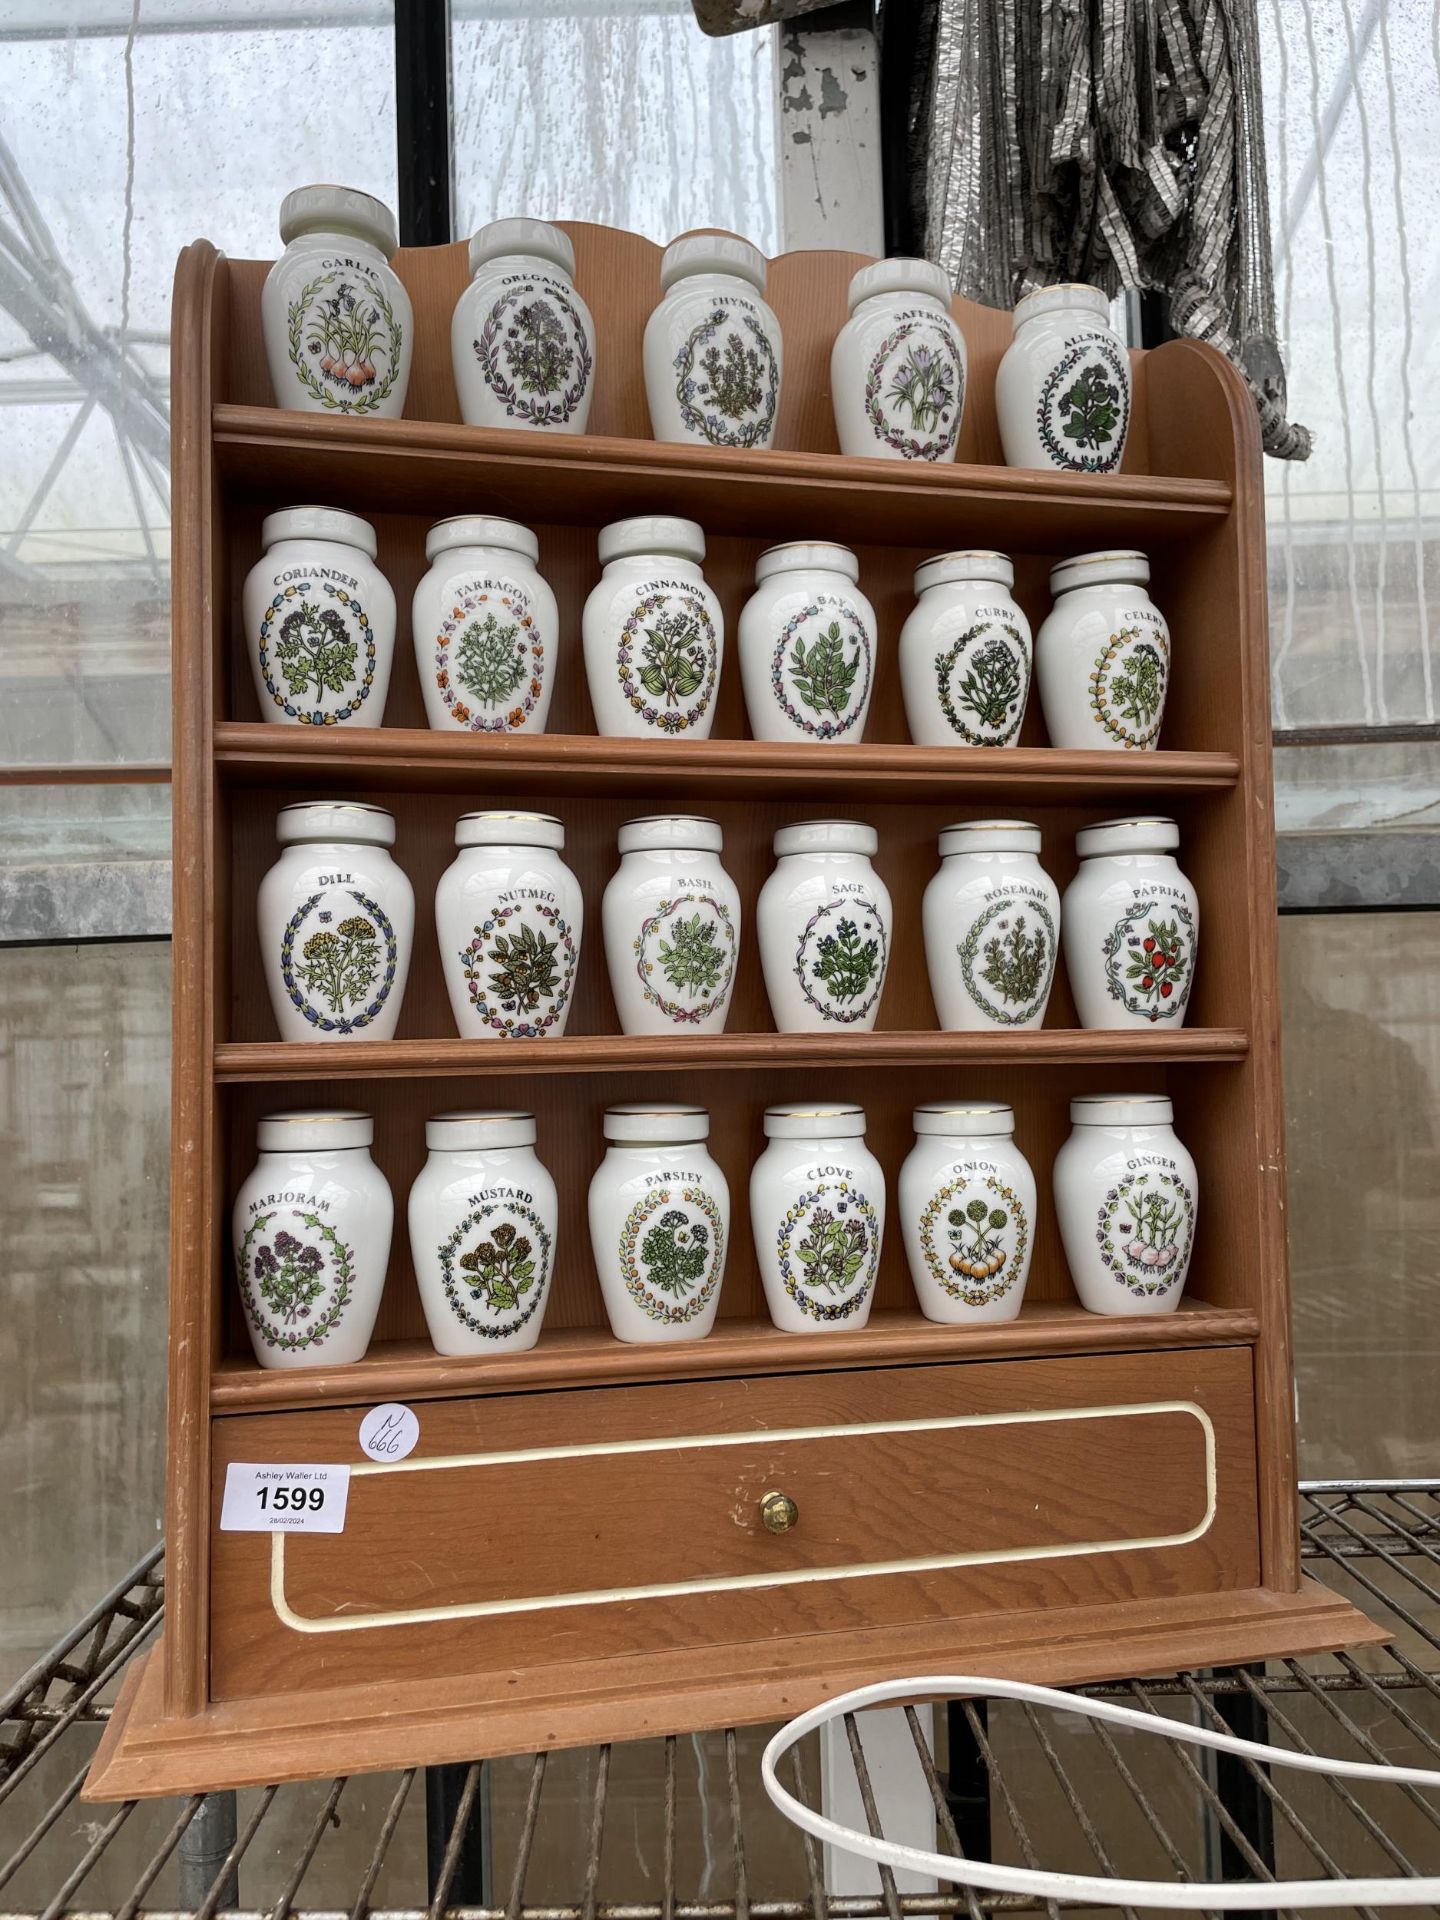 A WOODEN SPICE RACK WITH LOWER DRAWERS AND 23 GLORIA CONCEPTS THE FRANKLIN MINT LIDDED SPICE JARS